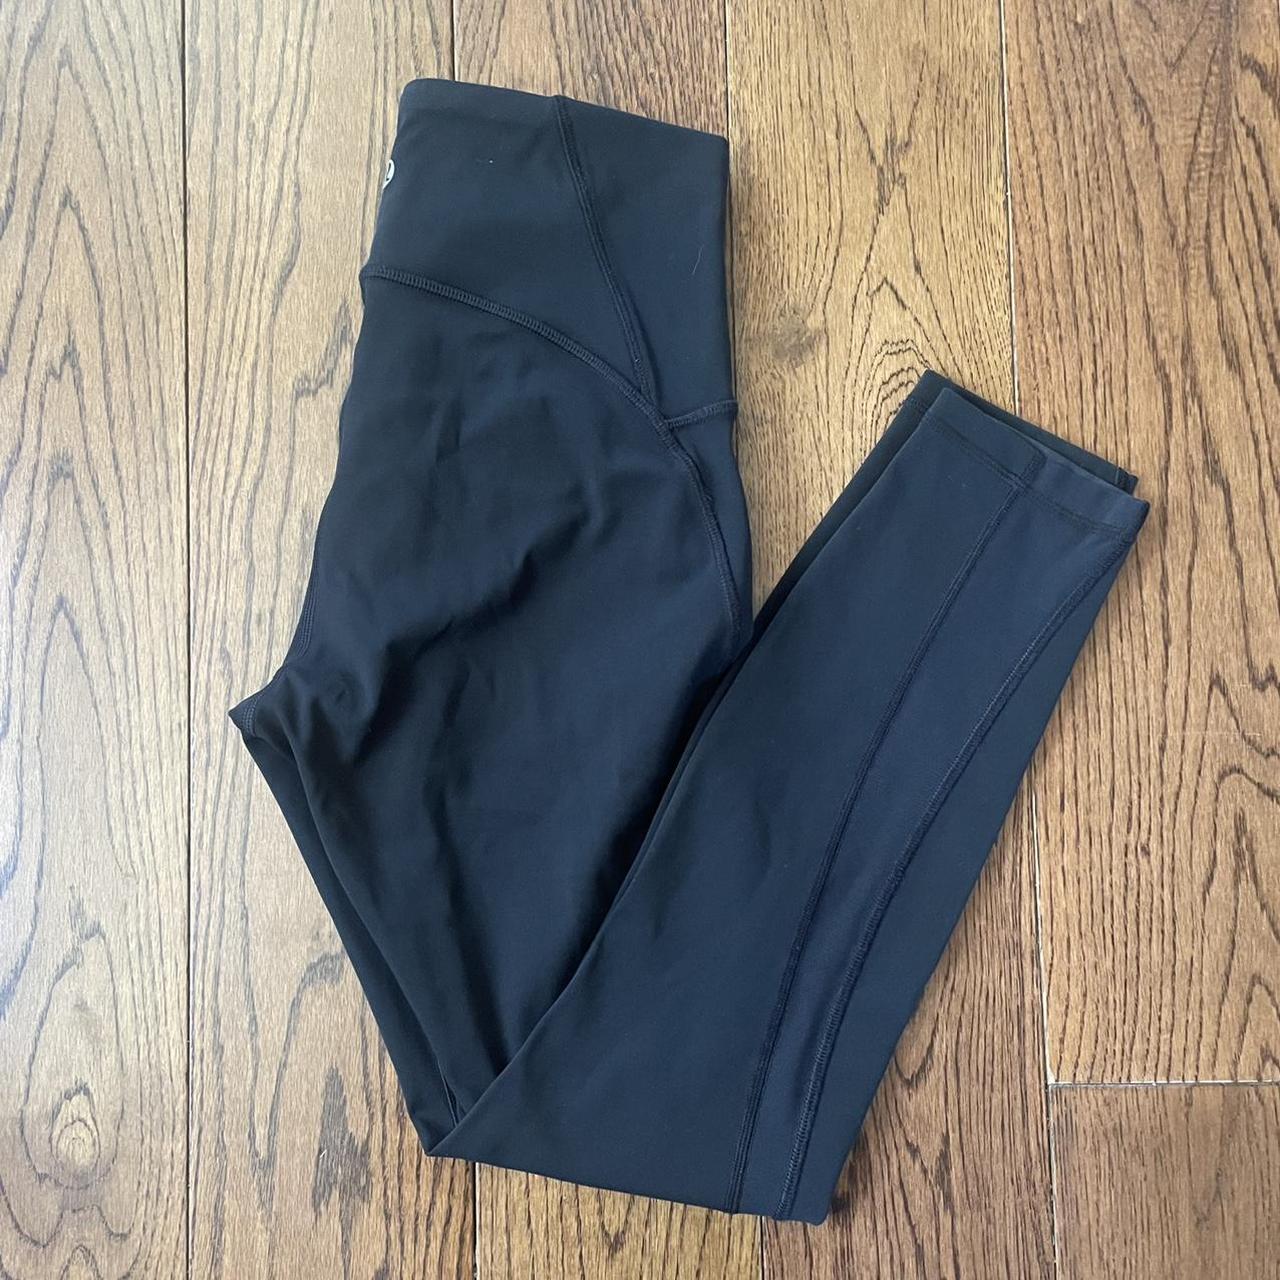 Lululemon leggings no clue what style tbh they're - Depop